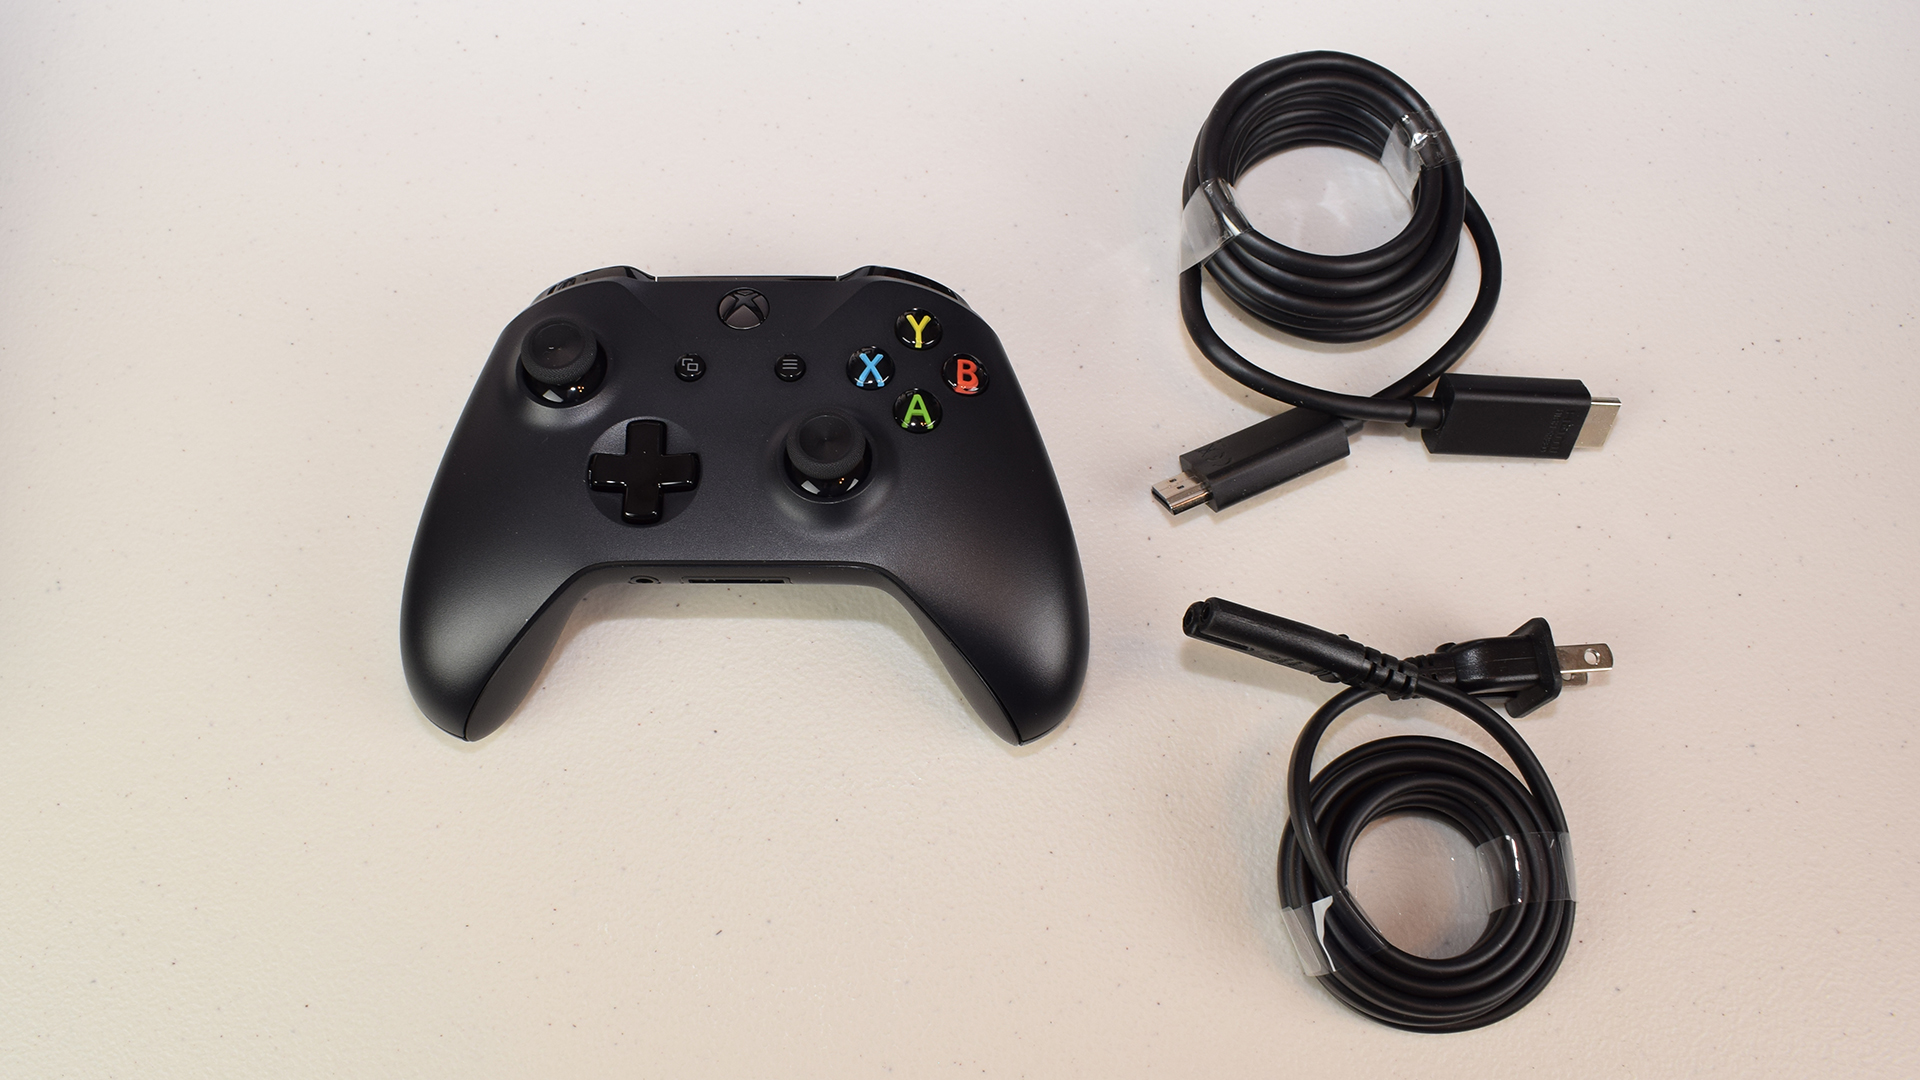 Xbox One X review included controller, power cable, and HDMI cable